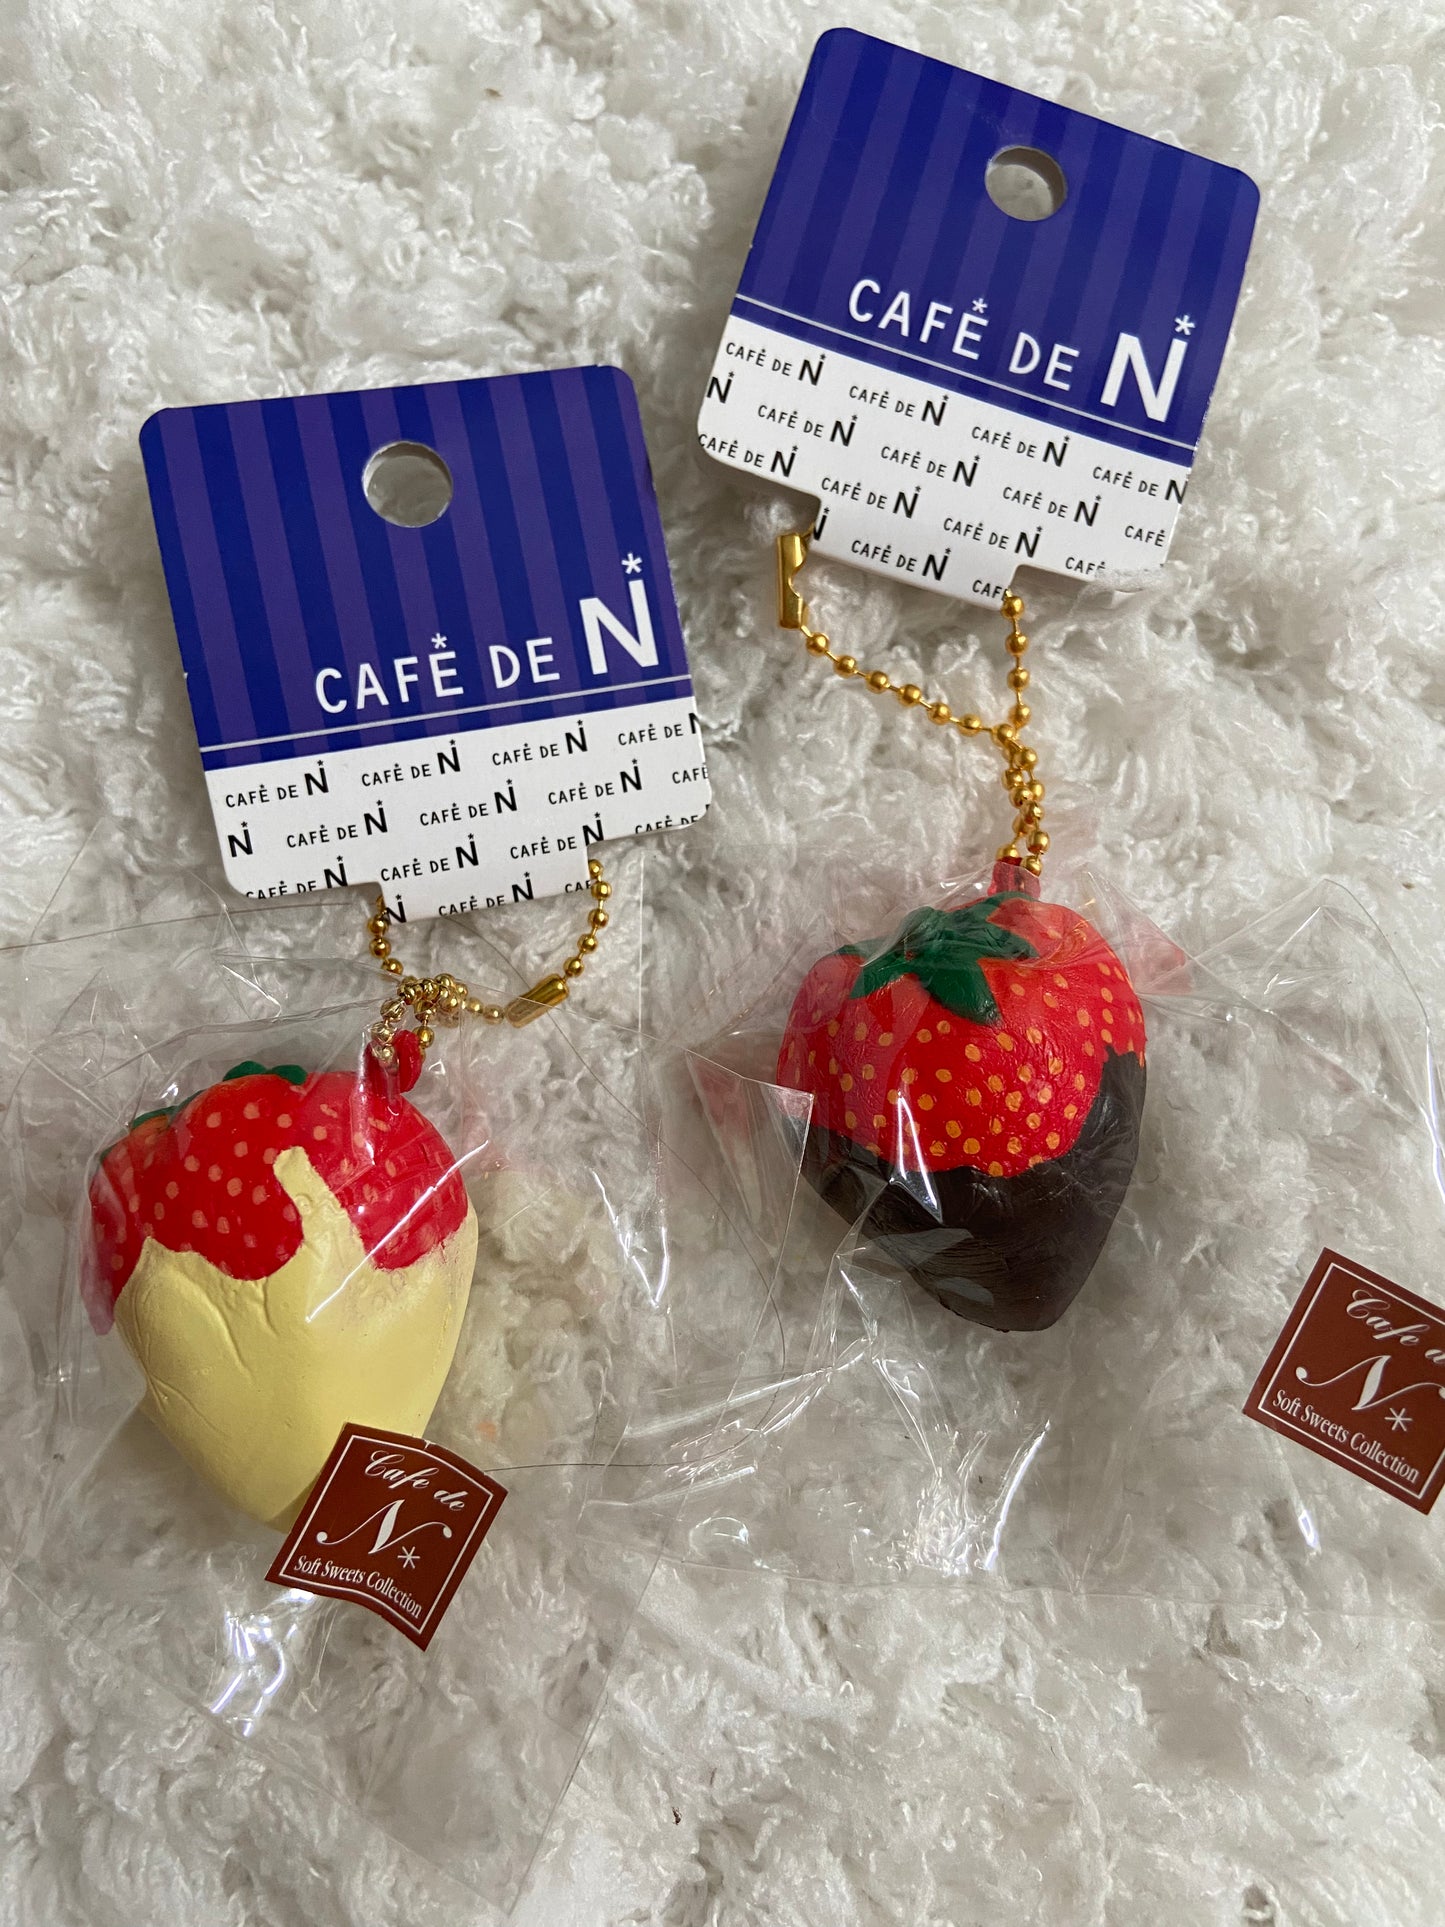 Cafe de n strawberry dipped in chocolate squishy